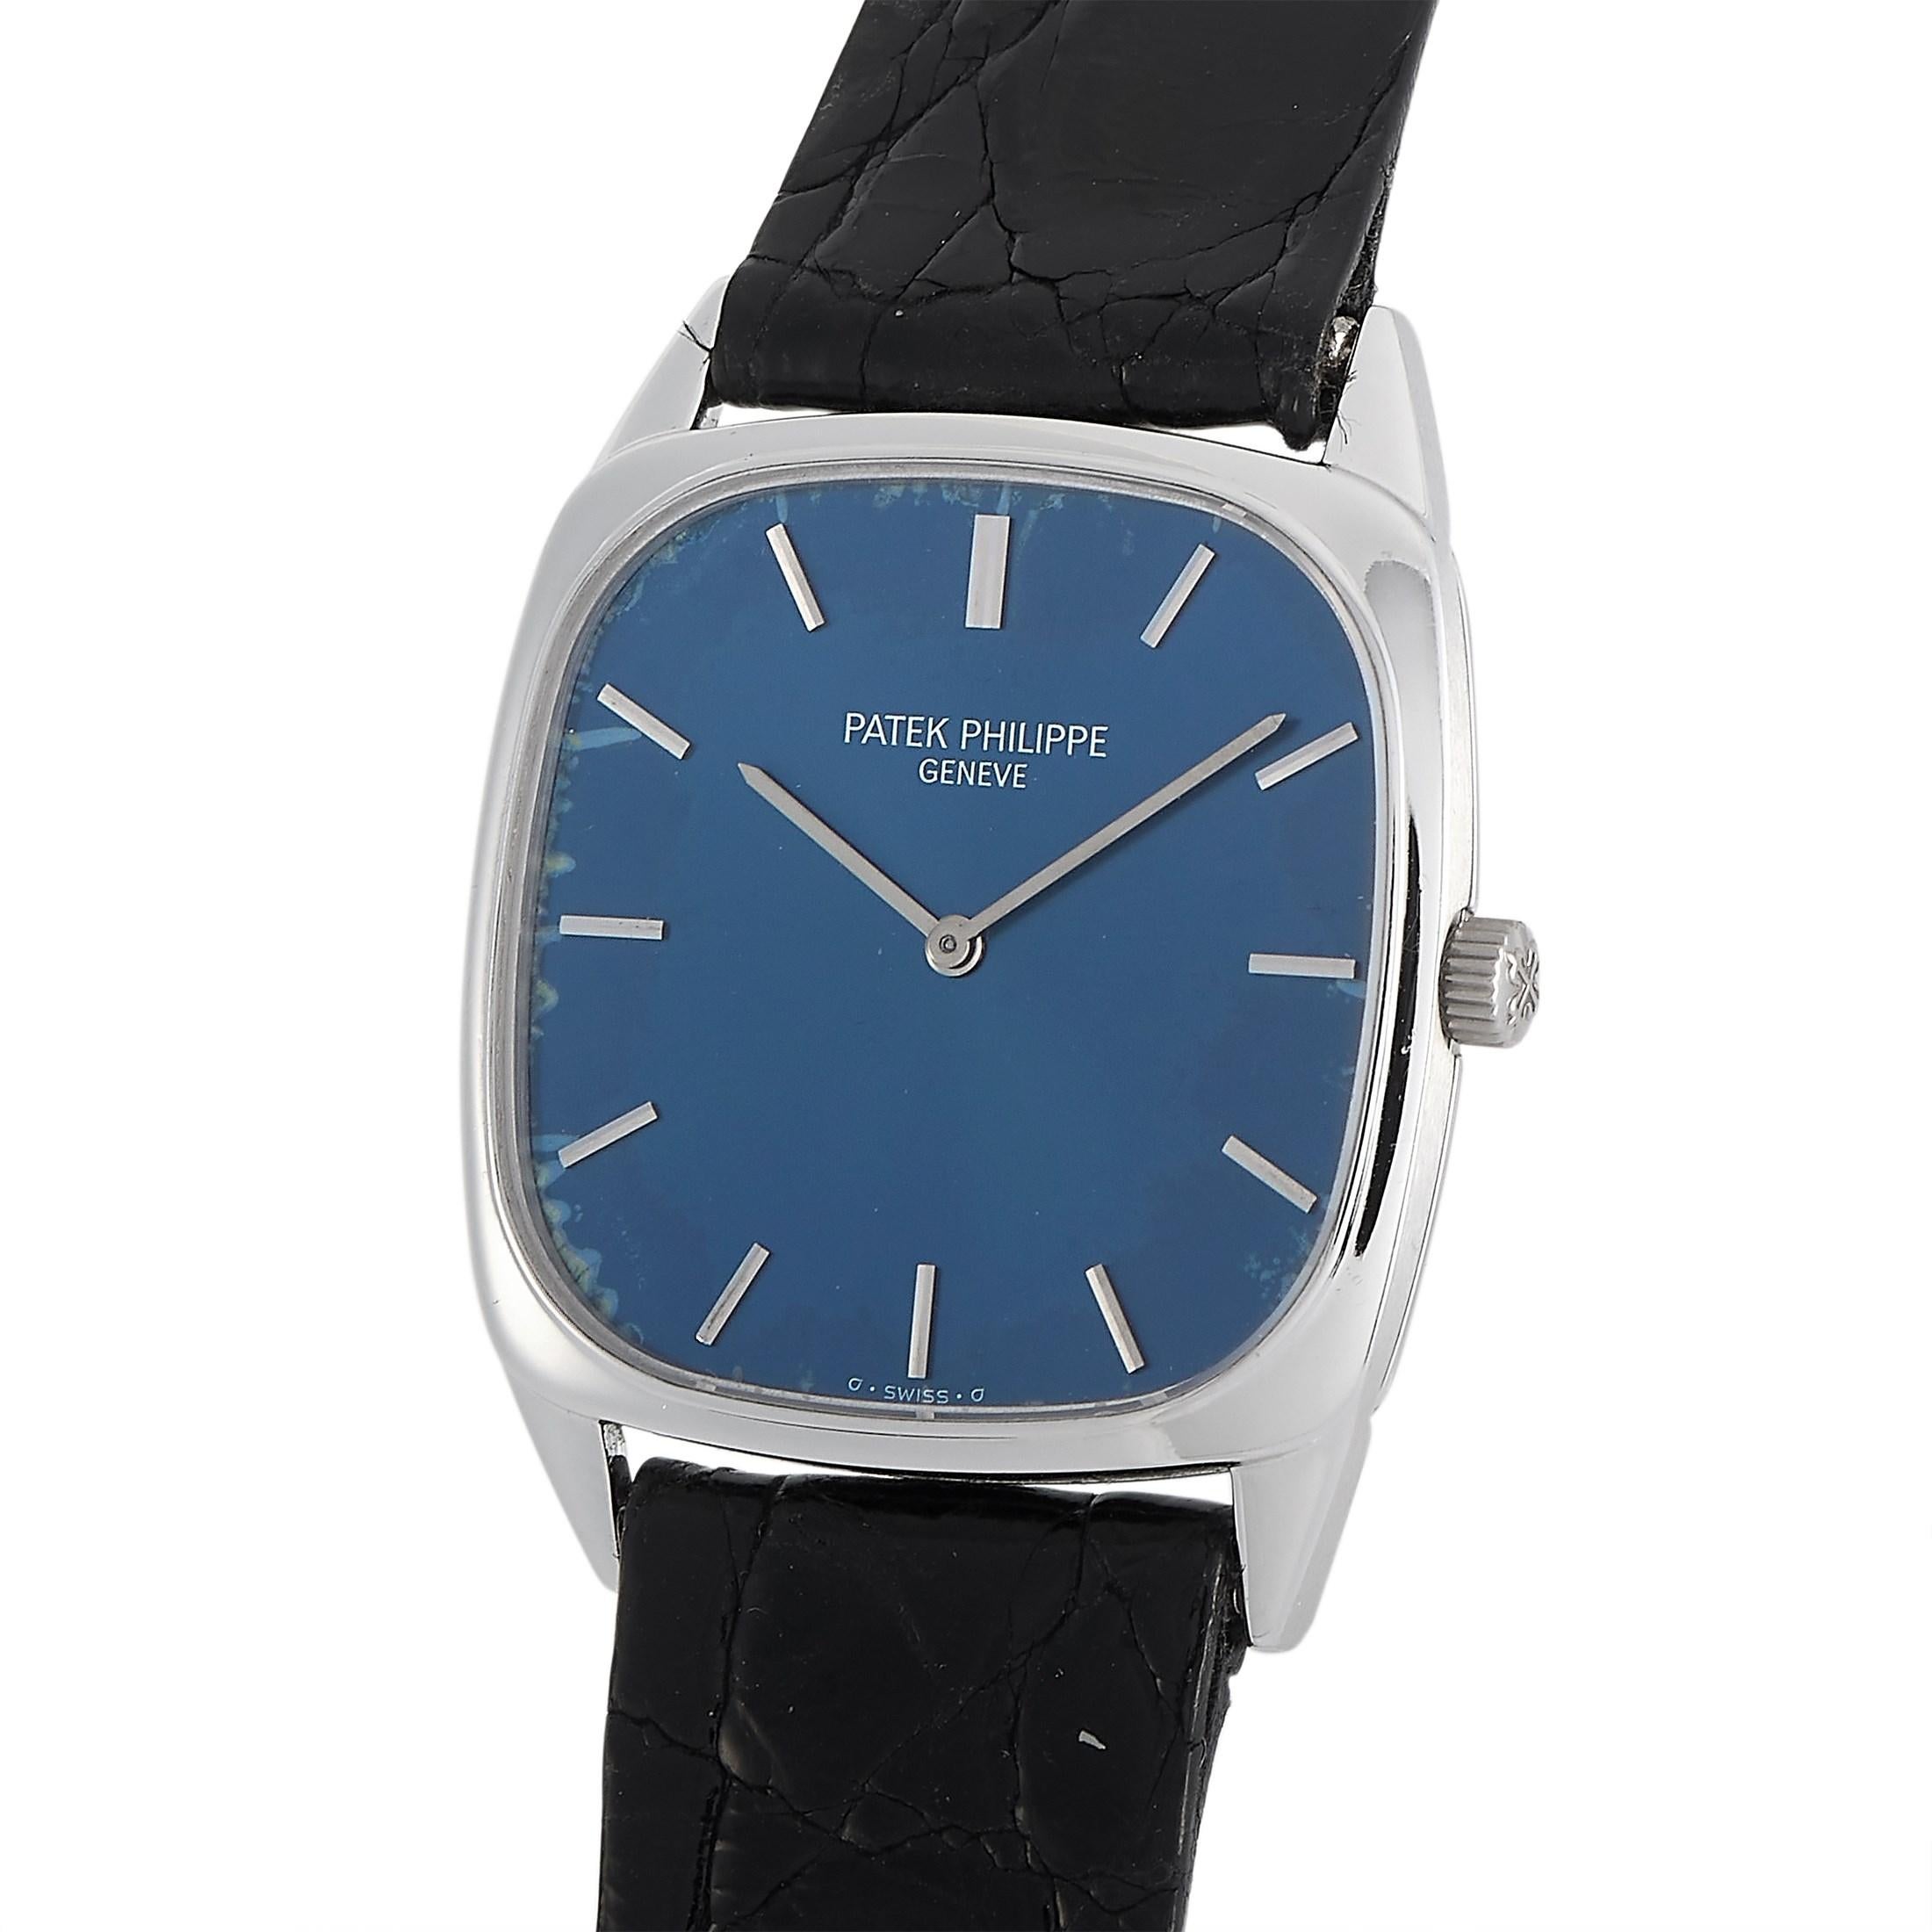 The Patek Philippe Ellipse Watch, reference number 3566, is a stately timepiece that makes a statement thanks to its bold, minimalist aesthetic.

Sleek and simple, this sophisticated timepiece includes an 18K White Gold case measuring 28 x 35 mm.